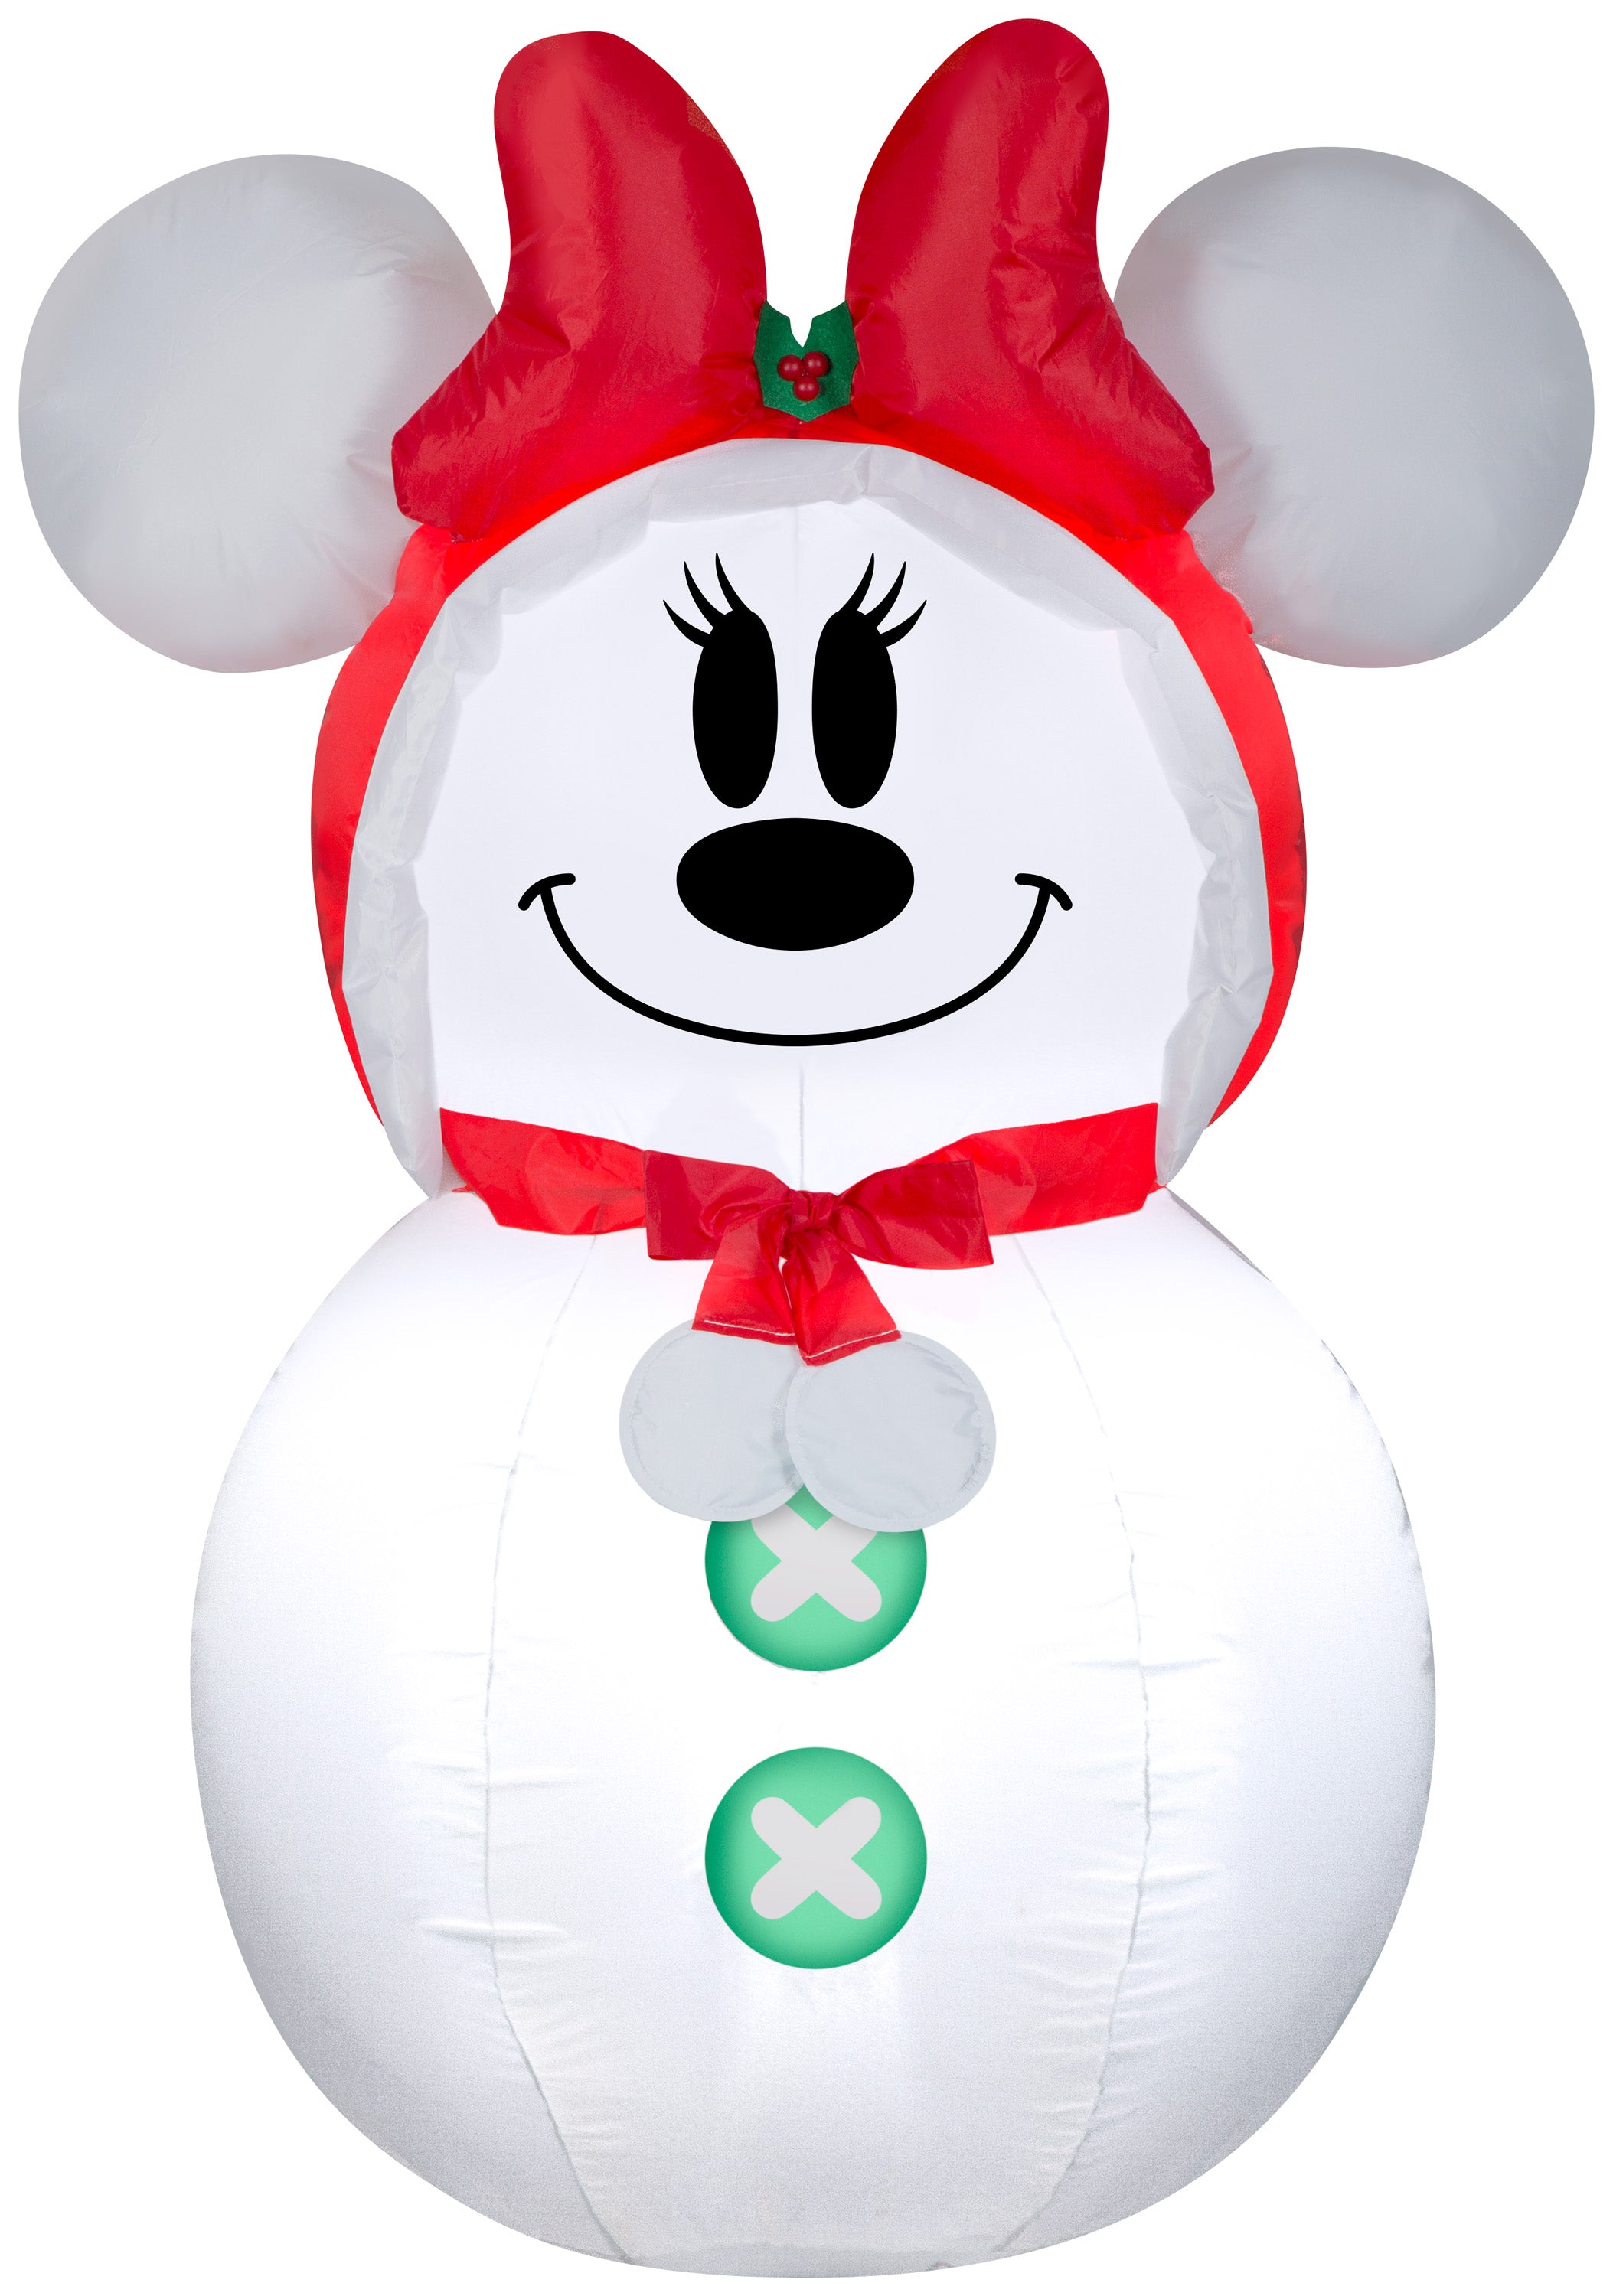 Gemmy Christmas Airblown Inflatable Minnie Mouse Snowman, 3.5 ft Tall, white